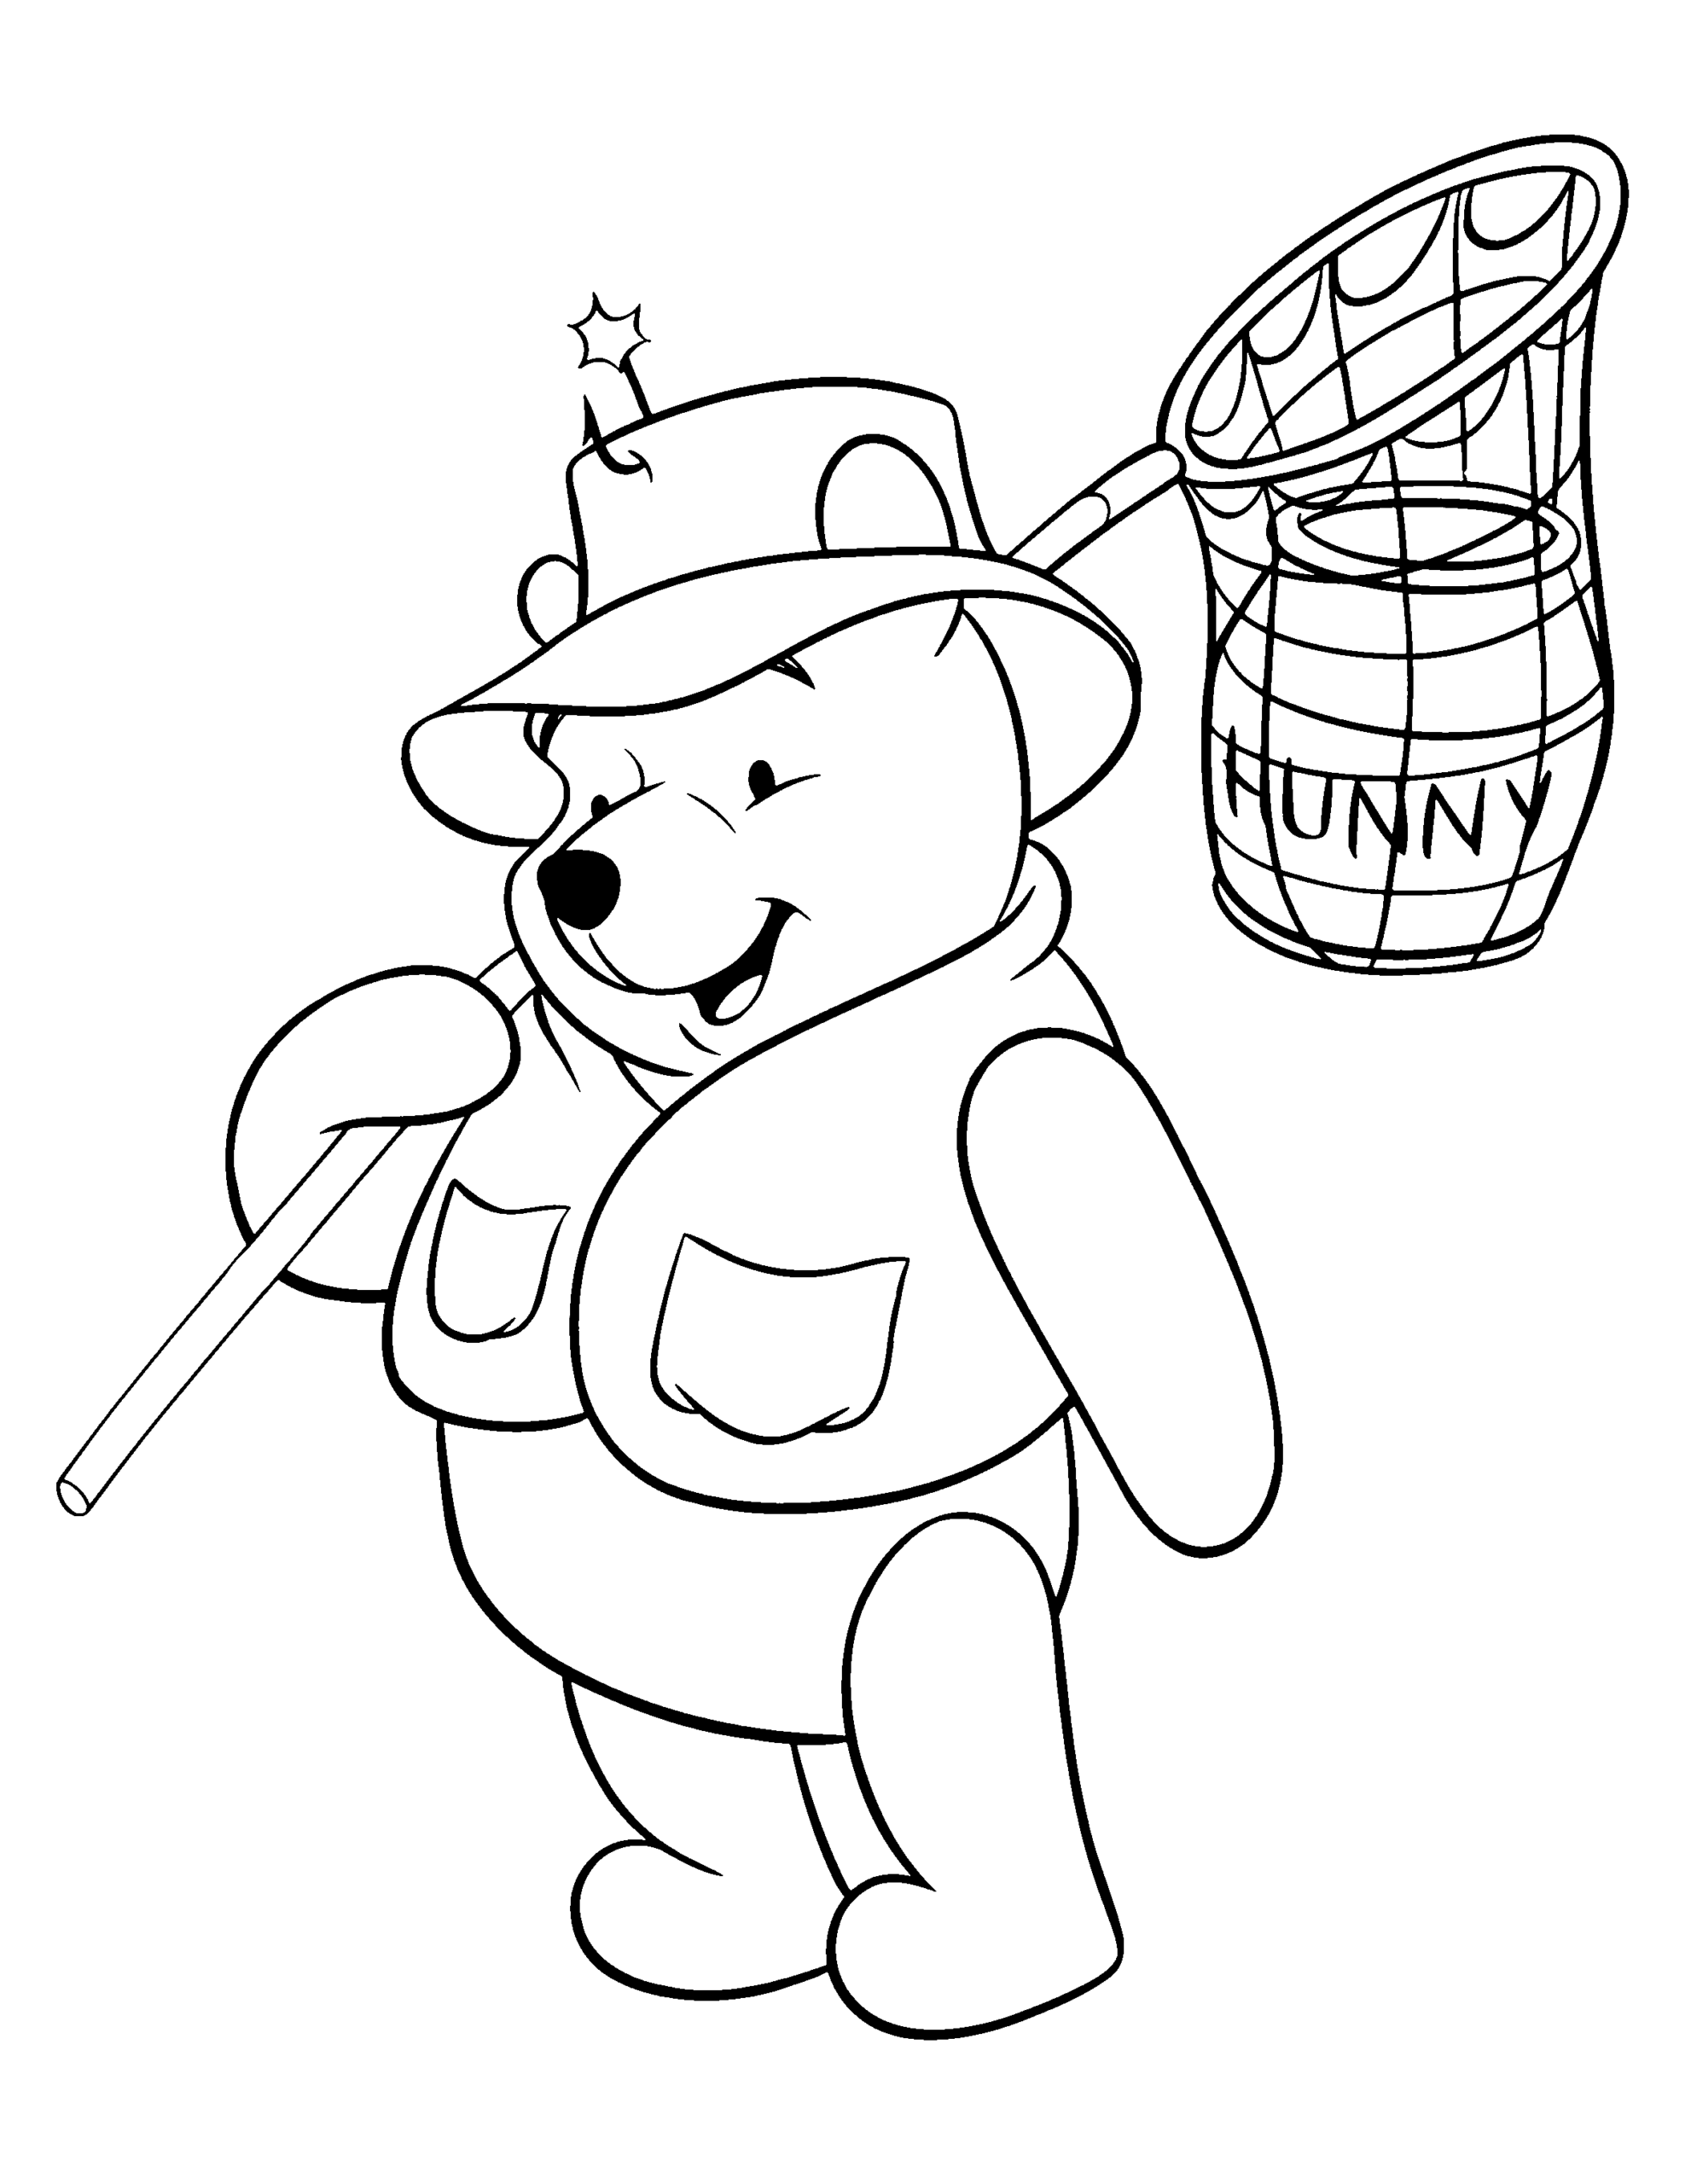 Winnie the Pooh Coloring Pages Cartoons winnie the pooh 119 Printable 2020 7099 Coloring4free